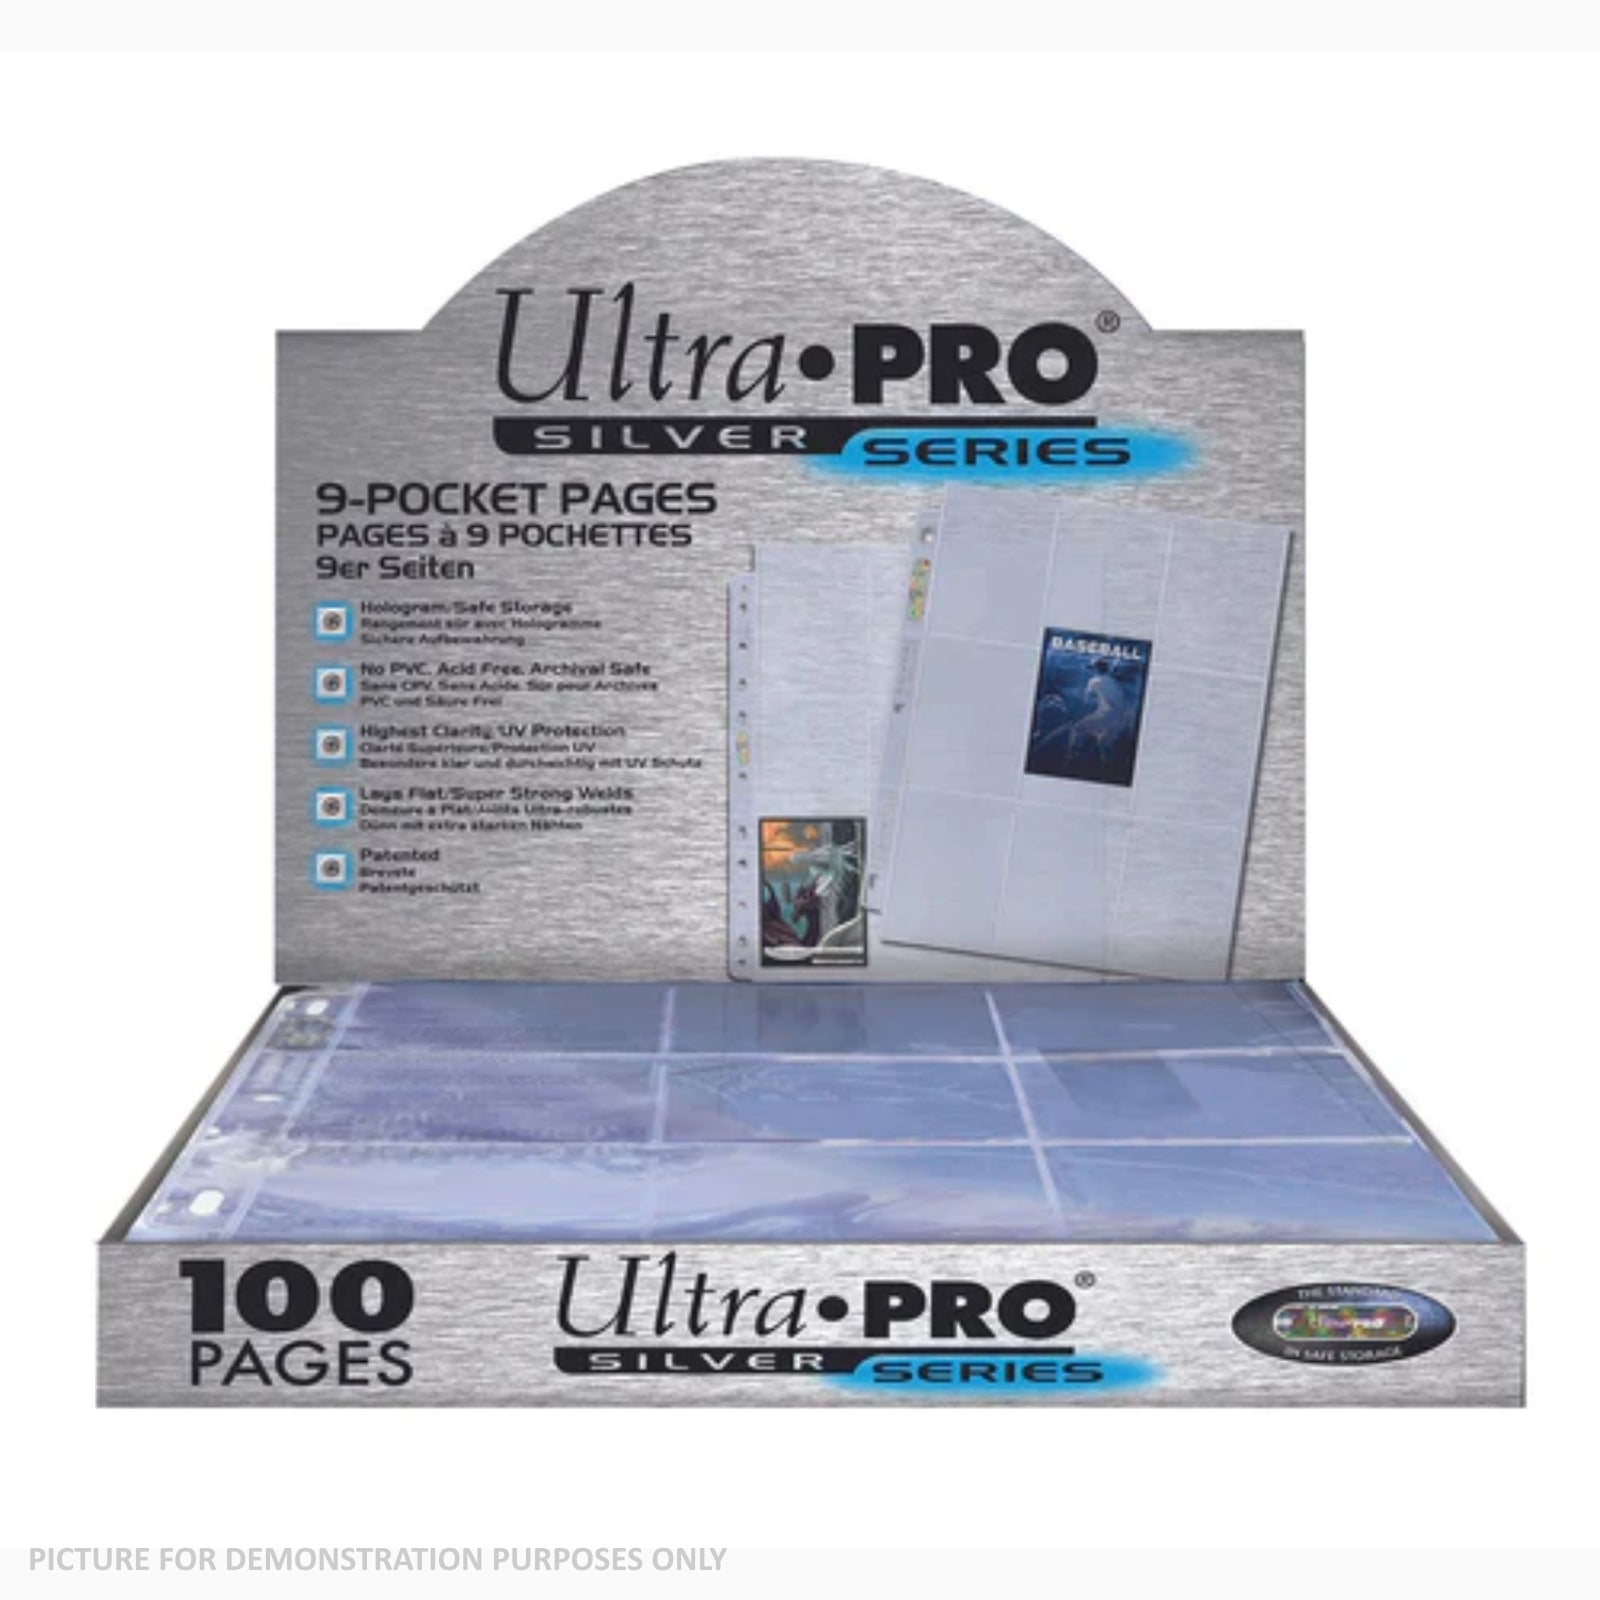 Ultra Pro SILVER SERIES 9 Pocket Pages - BOX of 100